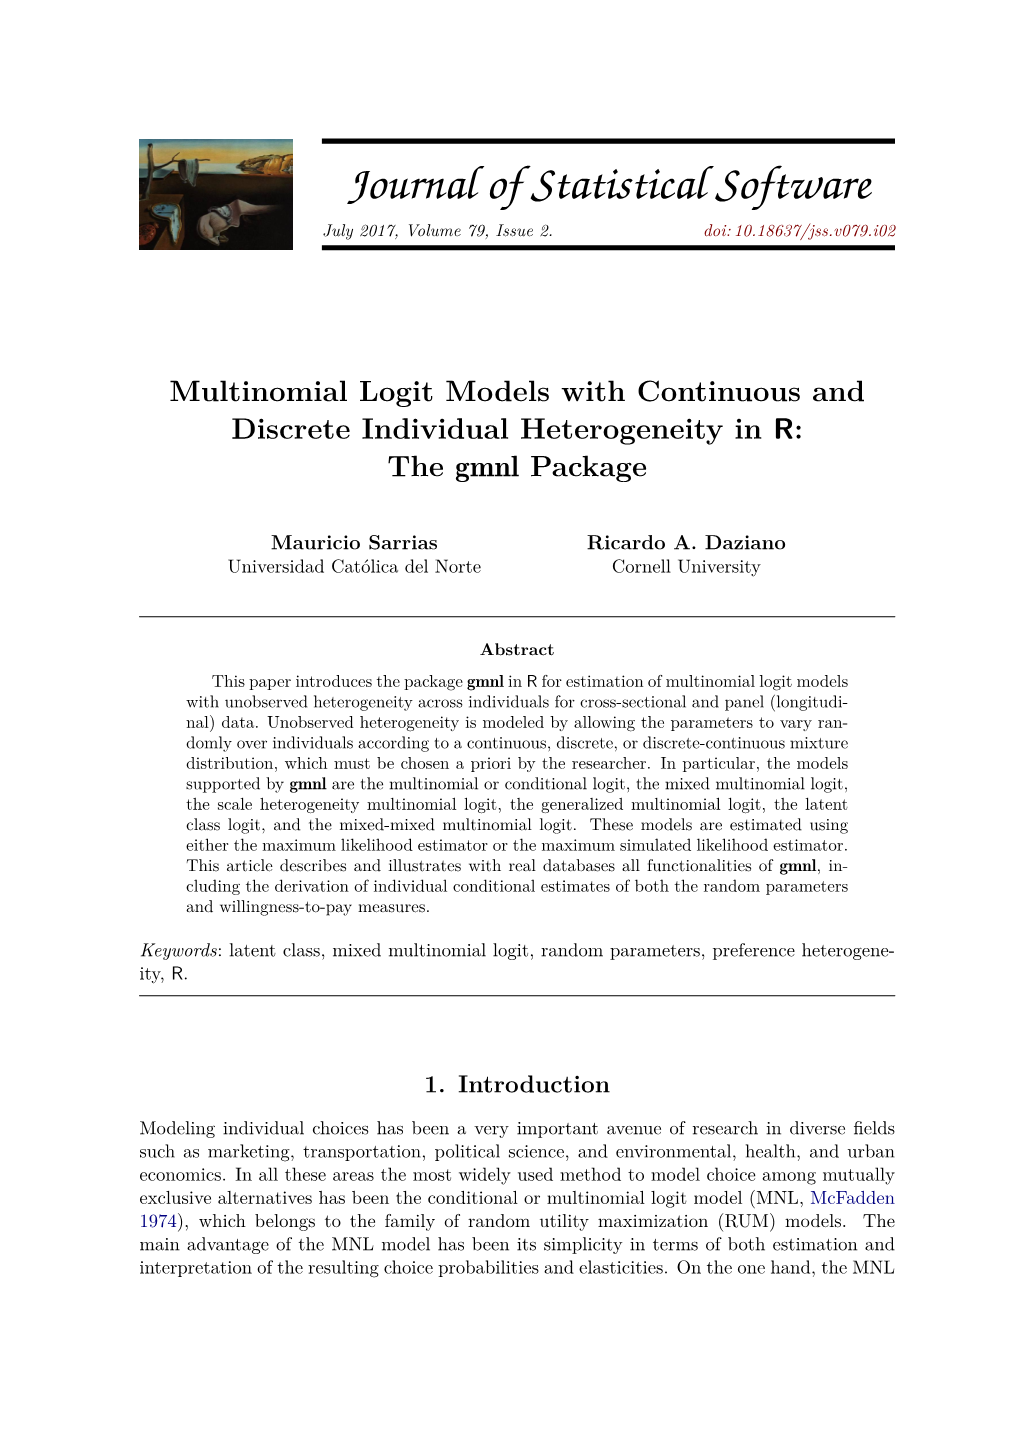 Multinomial Logit Models with Continuous and Discrete Individual Heterogeneity in R: the Gmnl Package